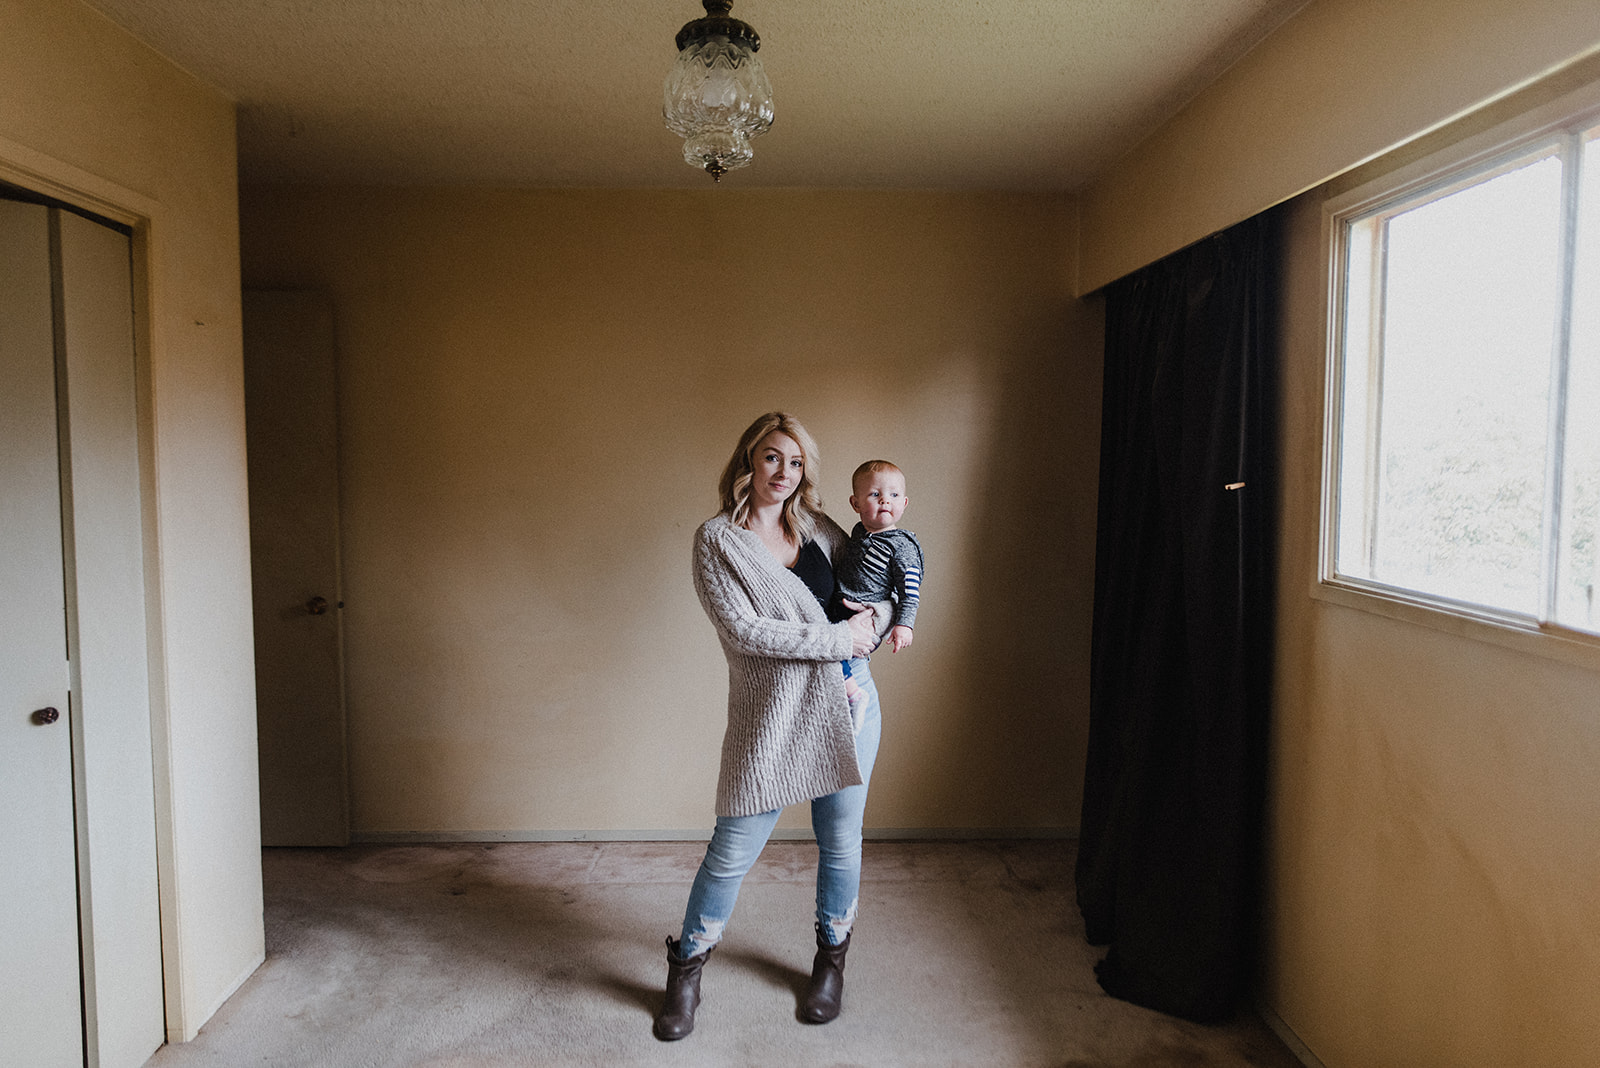 Skyleigh McCallum, Kamloops Realtor and financial educator, standing in her recently purchased home while holding her son.